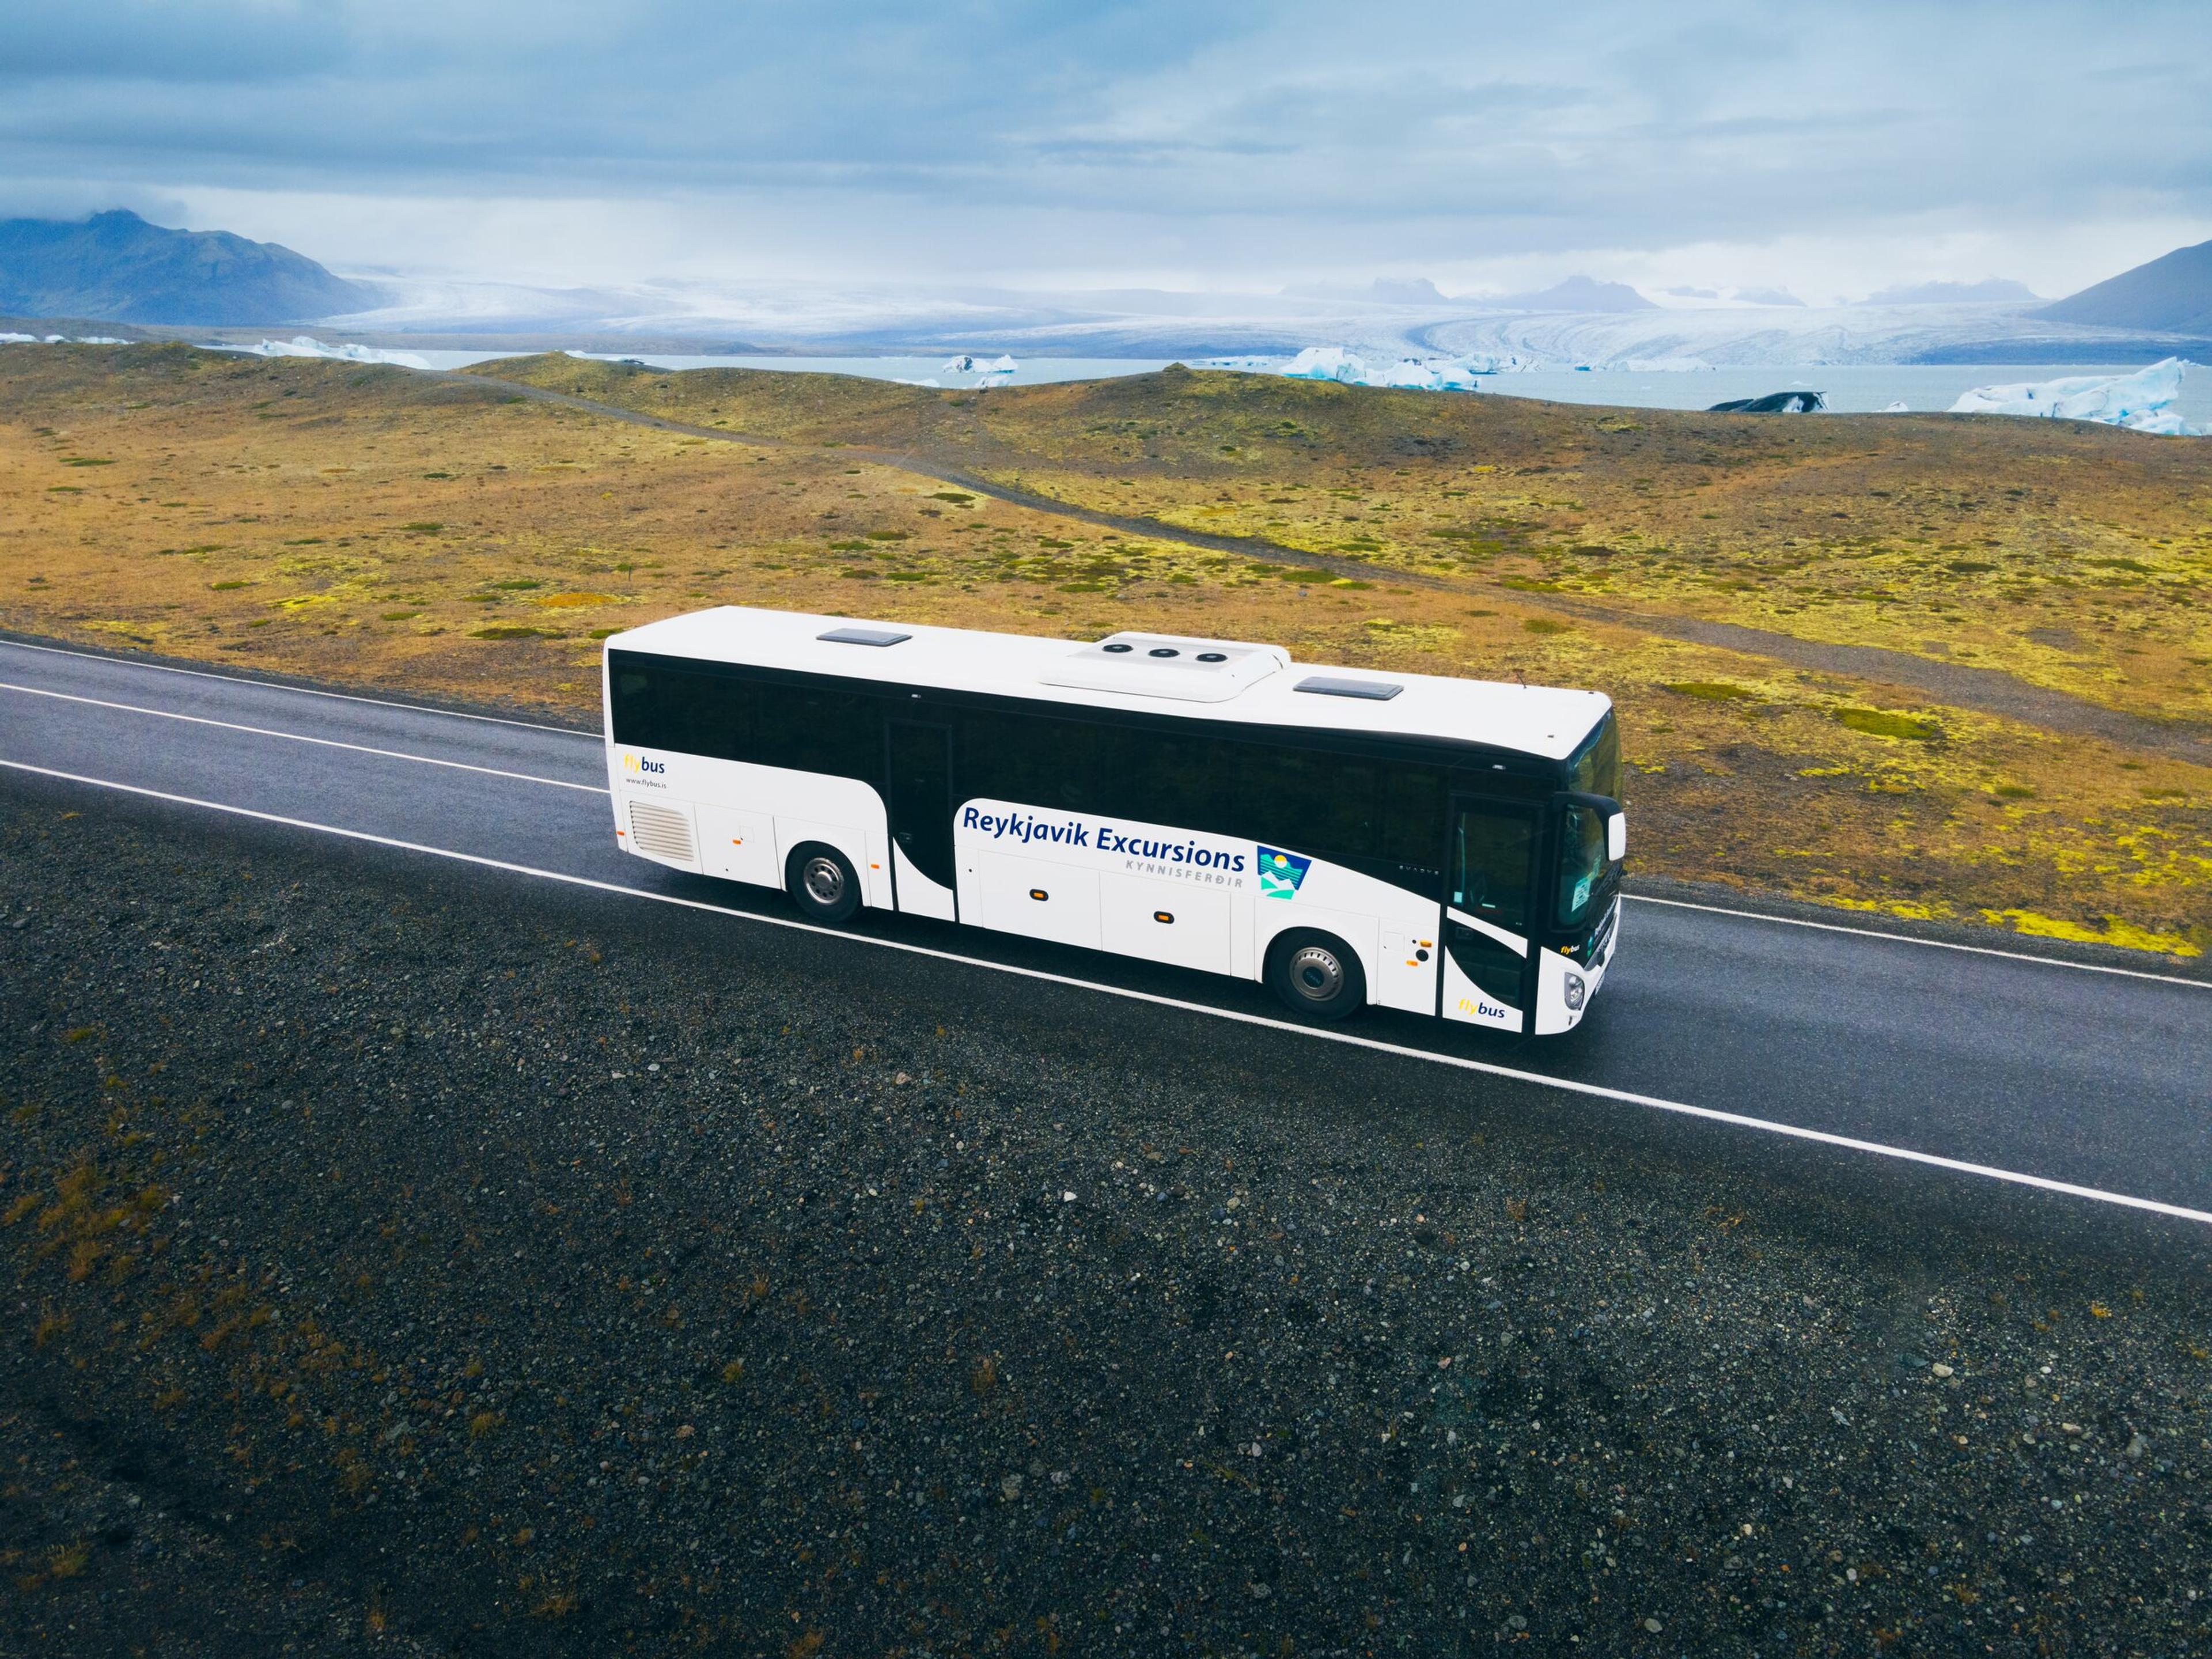 A tour bus traveling on a road through a vast, open landscape with mountains in the distance and overcast skies above.